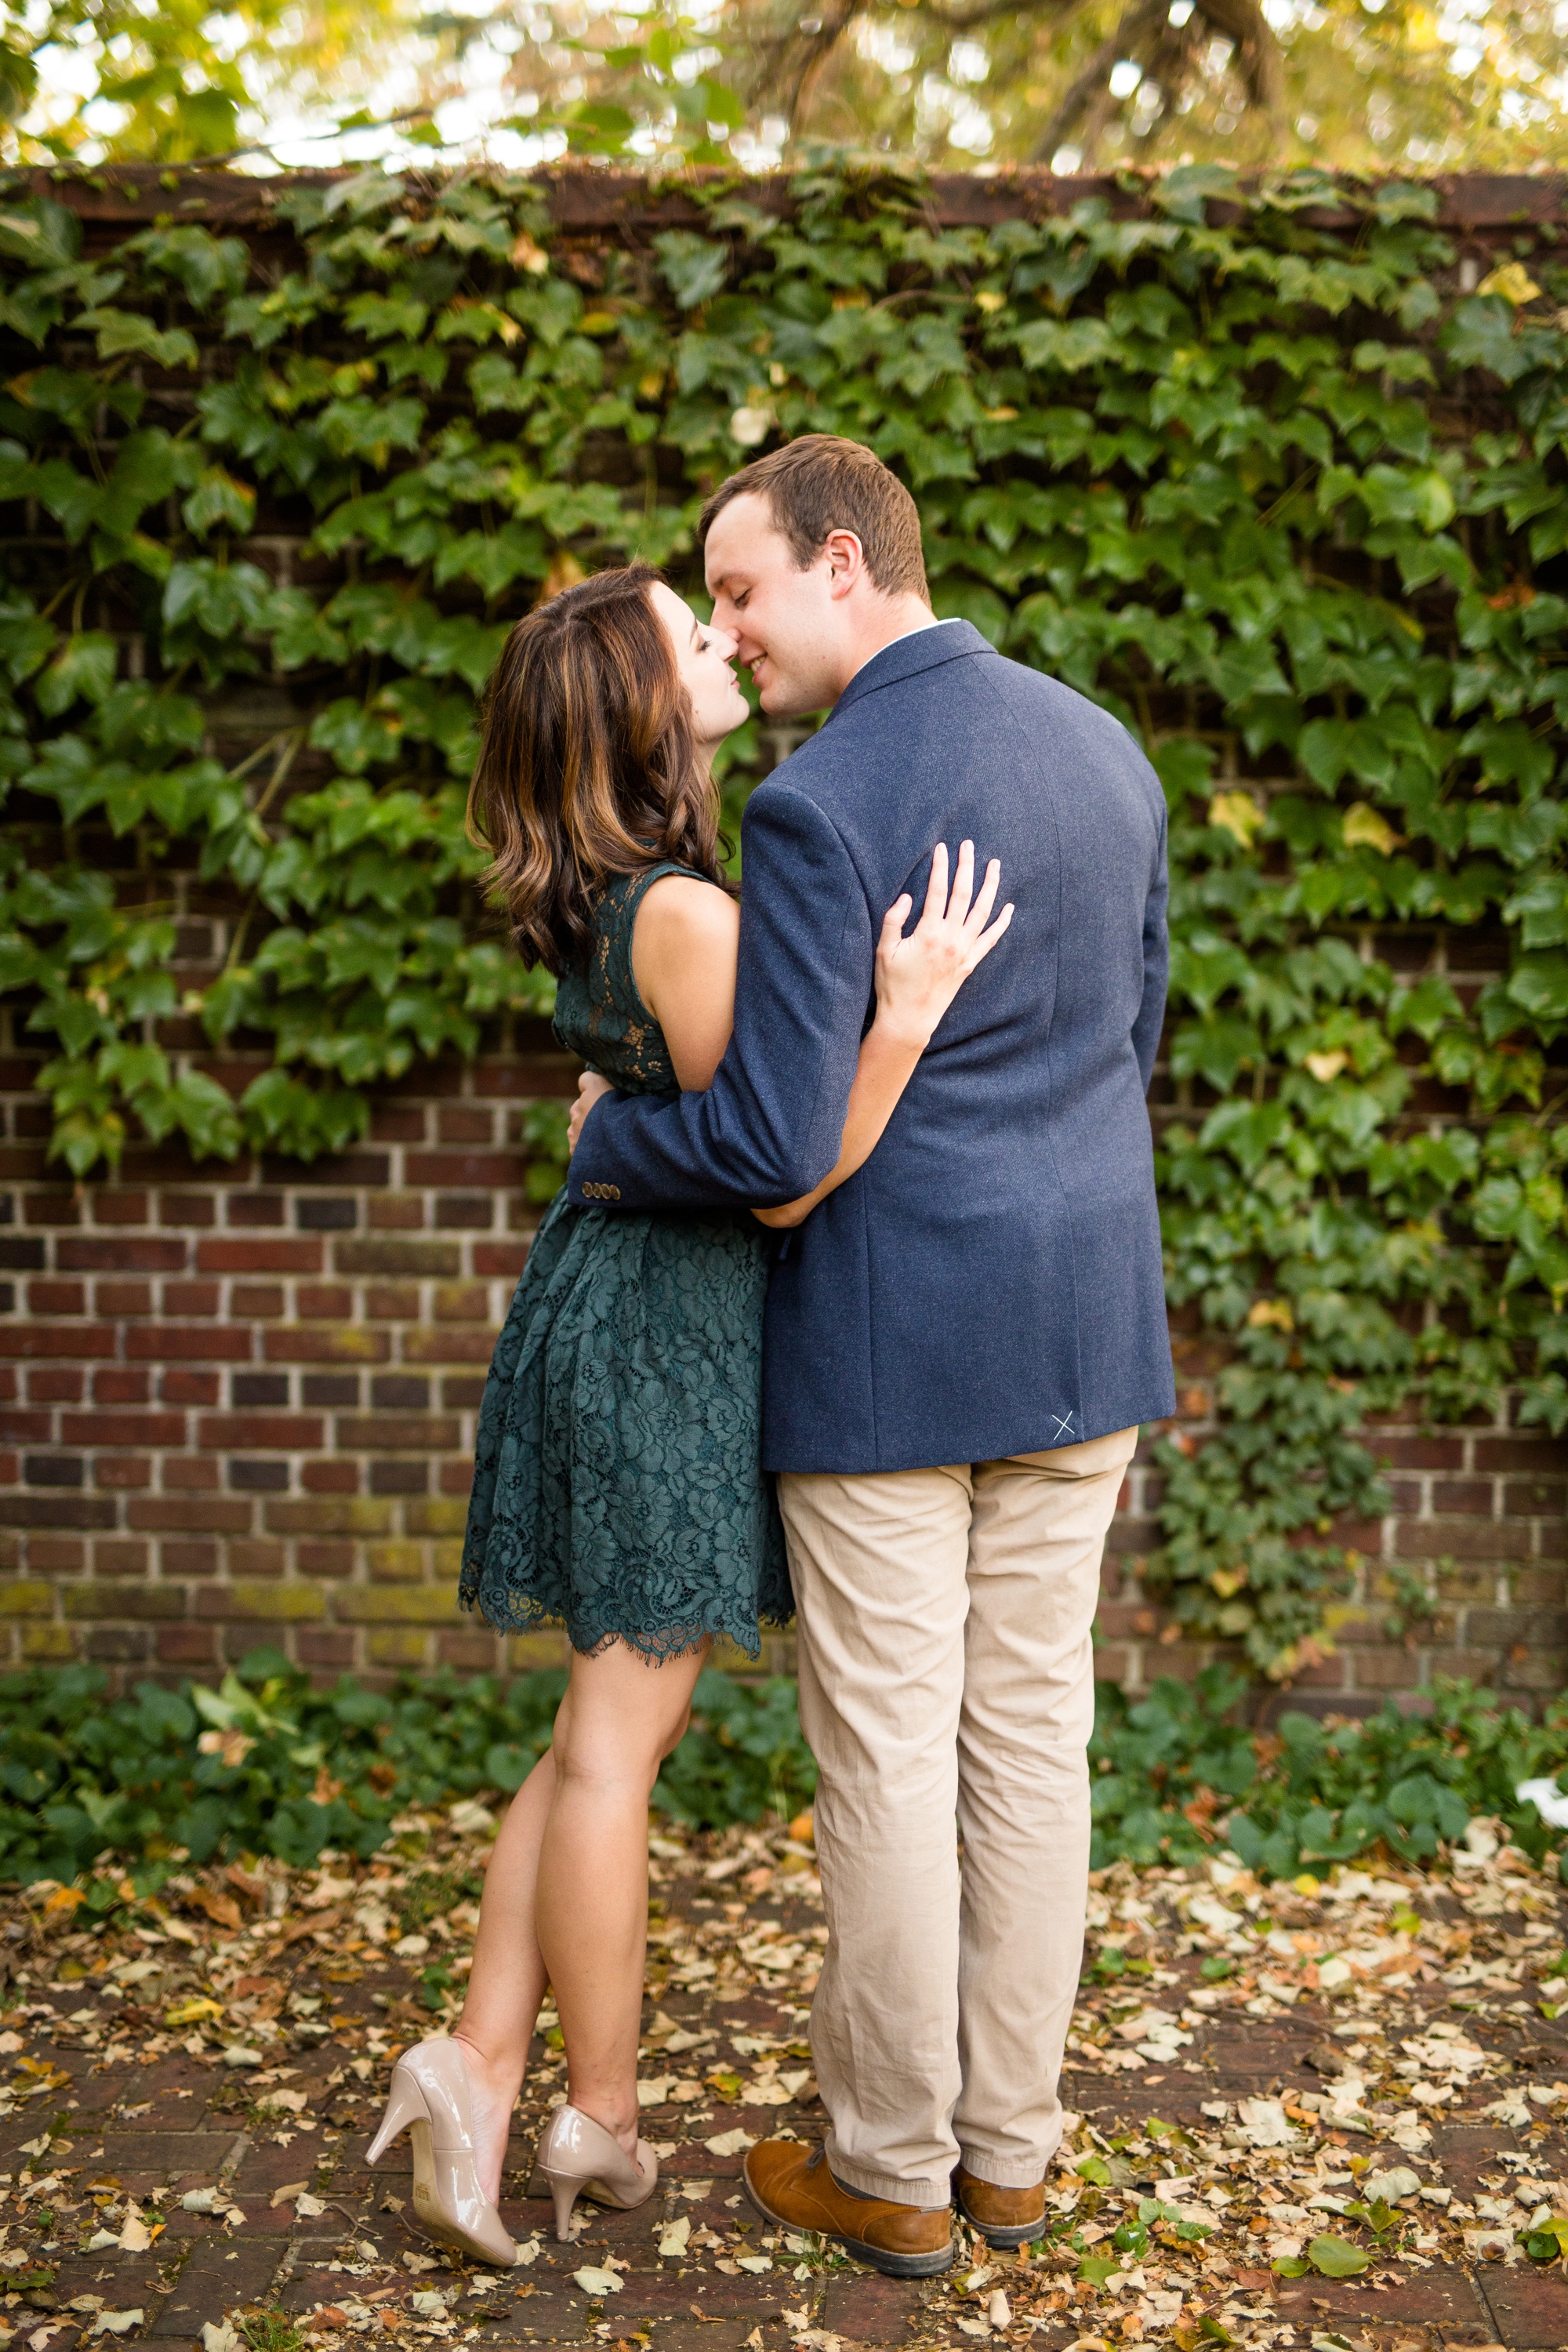 engagement pictures pittsburgh, pittsburgh wedding photographers, mellon park engagement photos, hartwood acres engagement photos, places for photo shoot pittsburgh